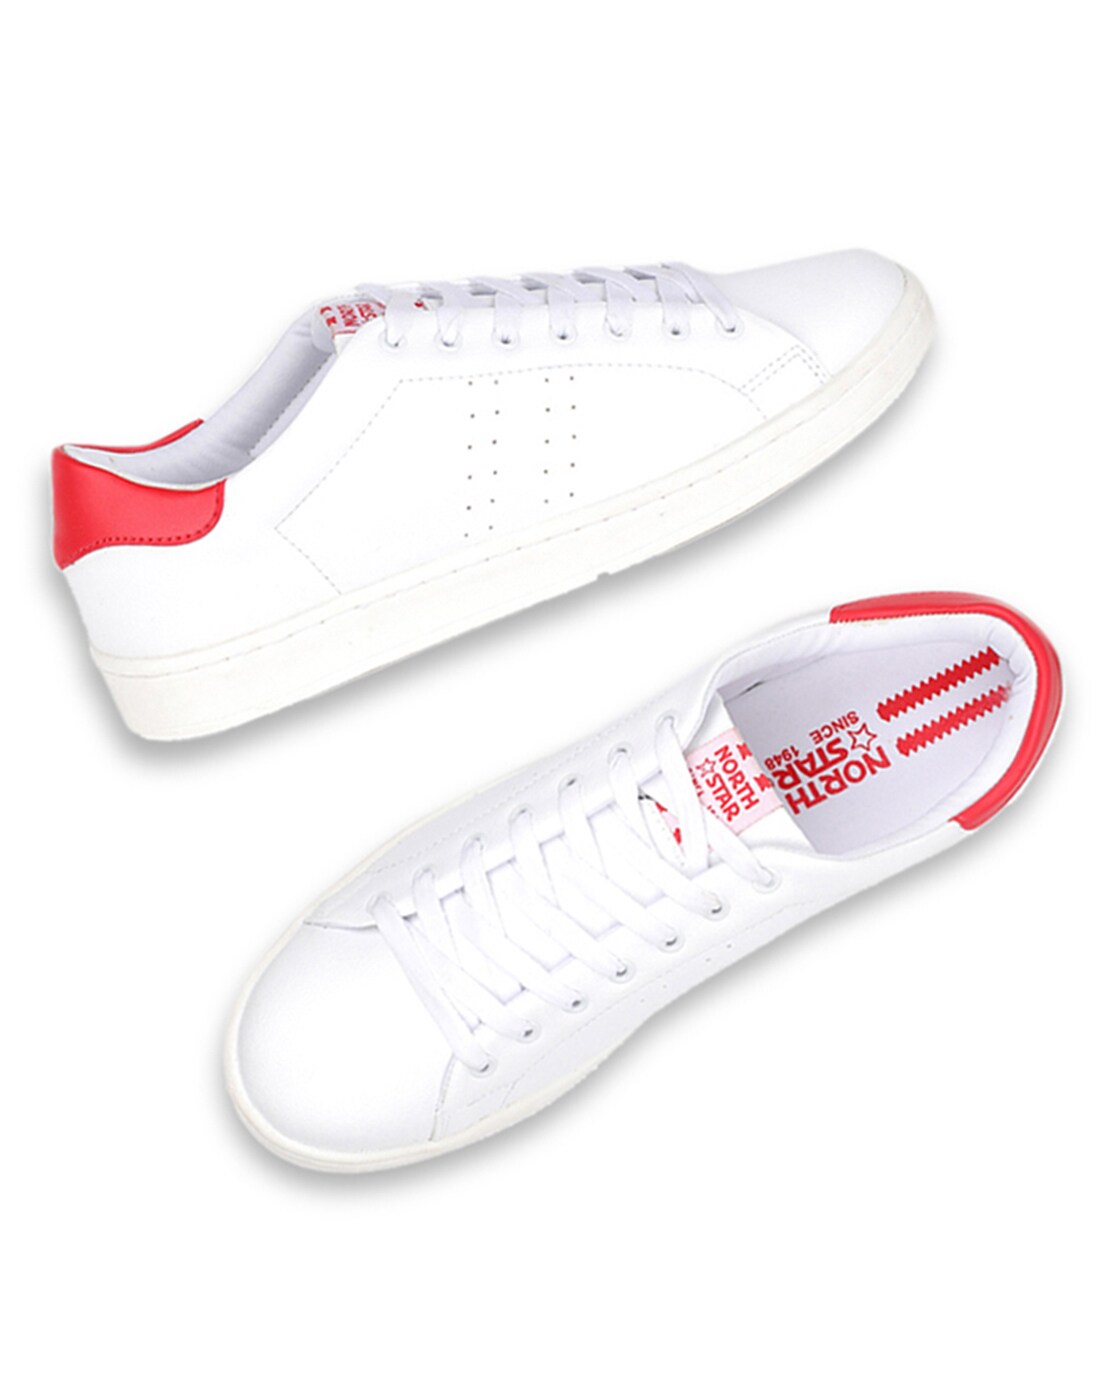 North Star Sneakers Shoes - Buy North Star Sneakers Shoes online in India